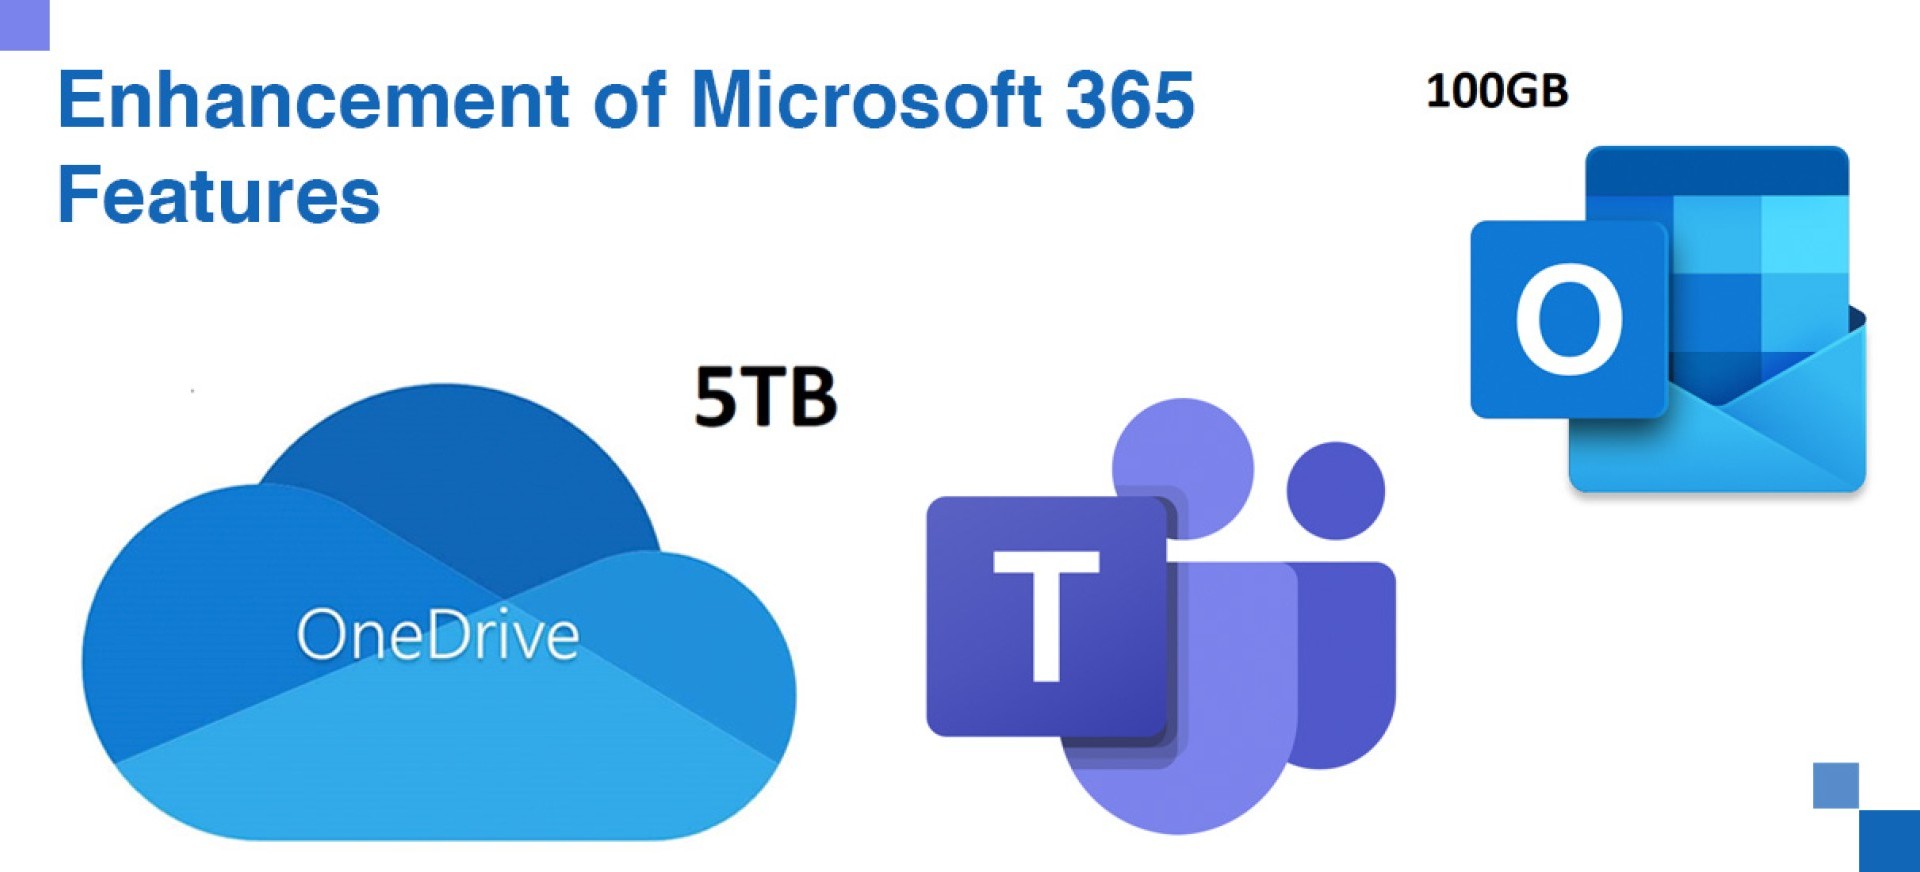 Enhancement of Microsoft 365 Features